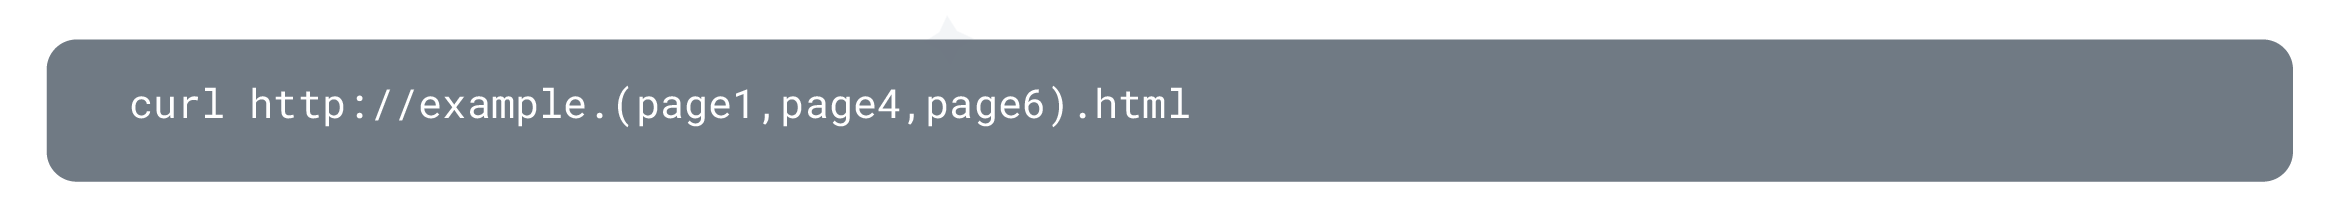 curl command line for multiple pages on website